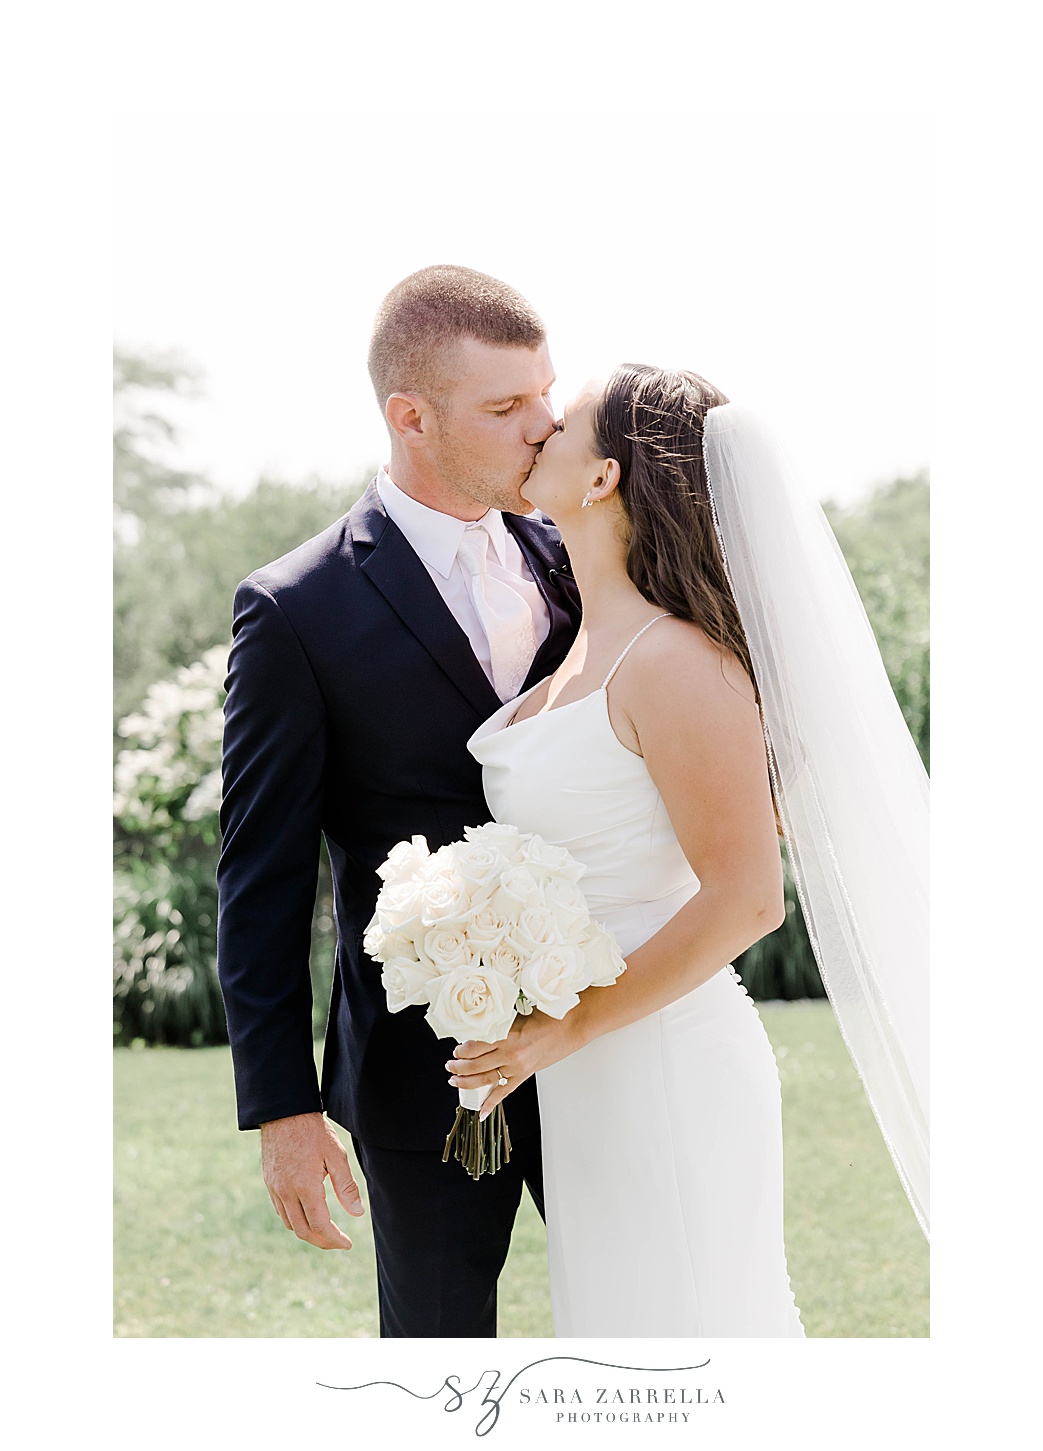 bride and groom kiss while bride holds bouquet of white flowers 